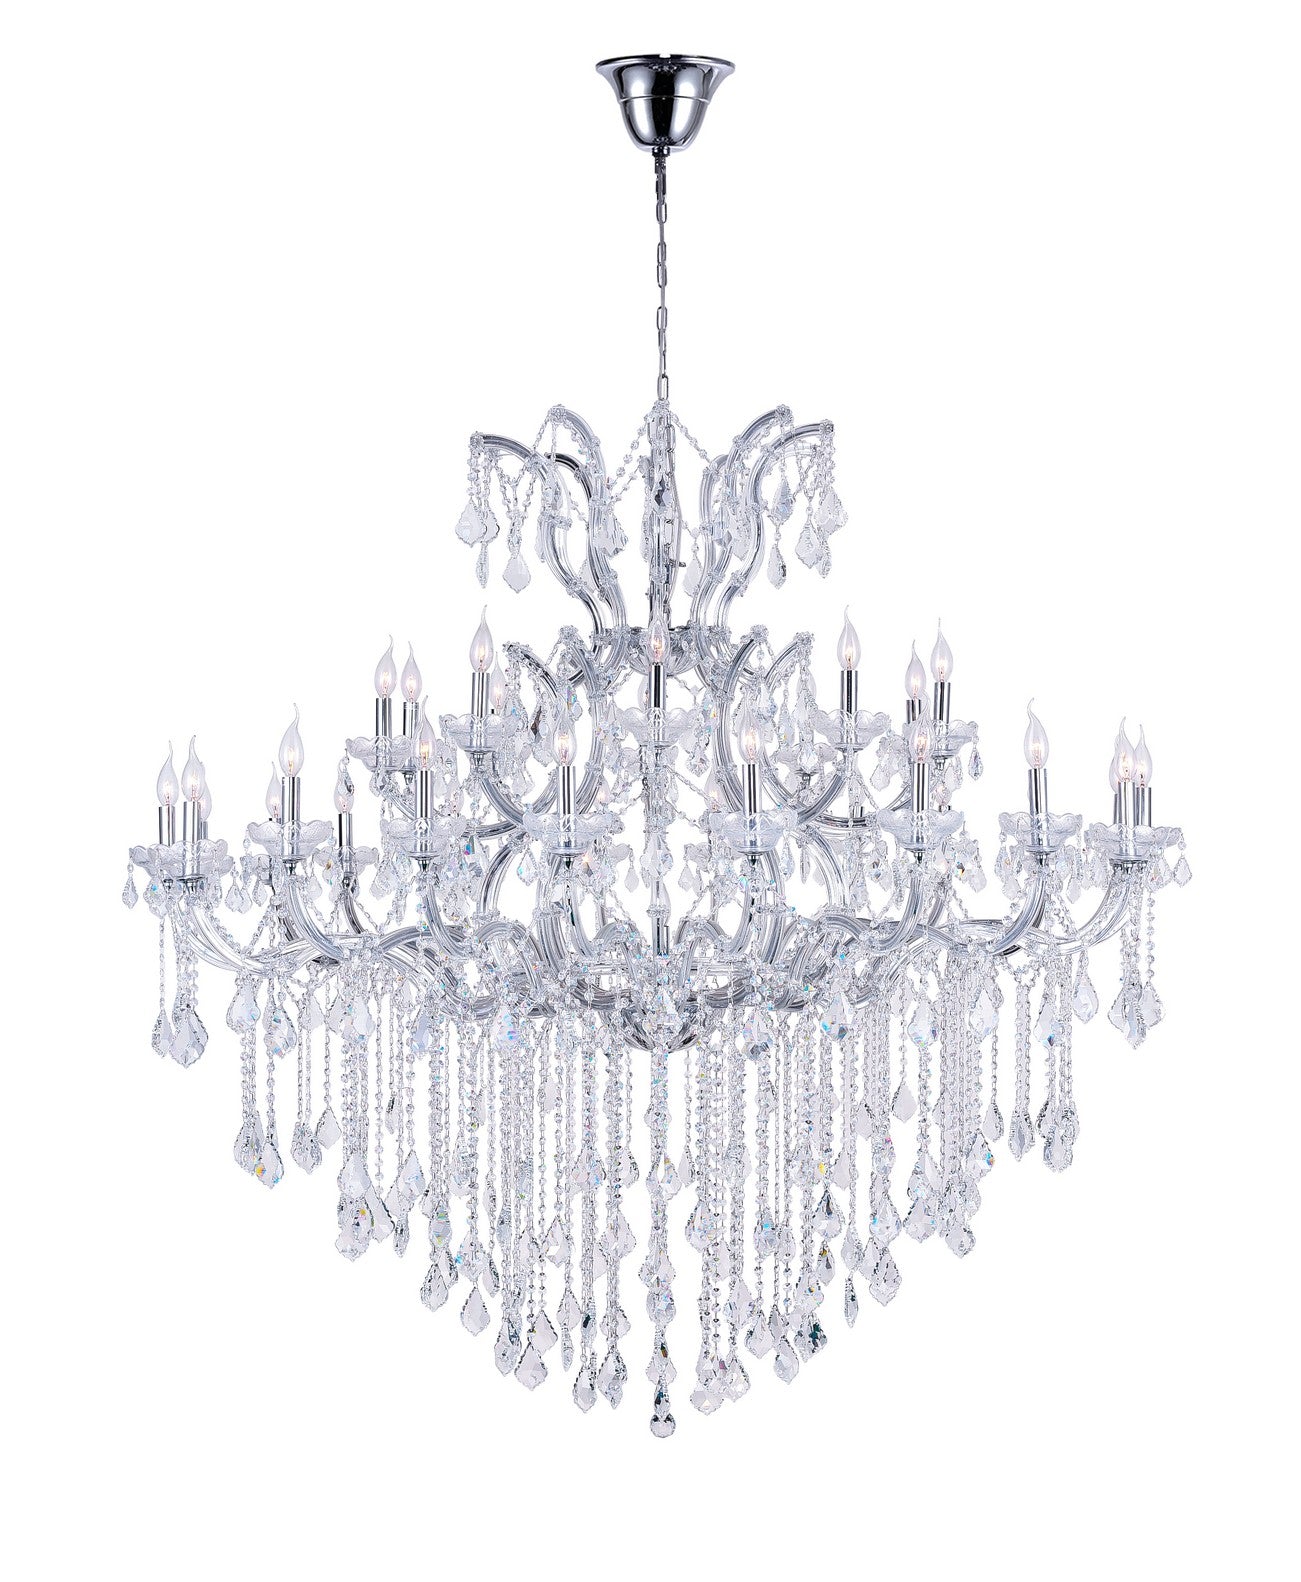 31 LIGHT UP CHANDELIER WITH CHROME FINISH - Dreamart Gallery